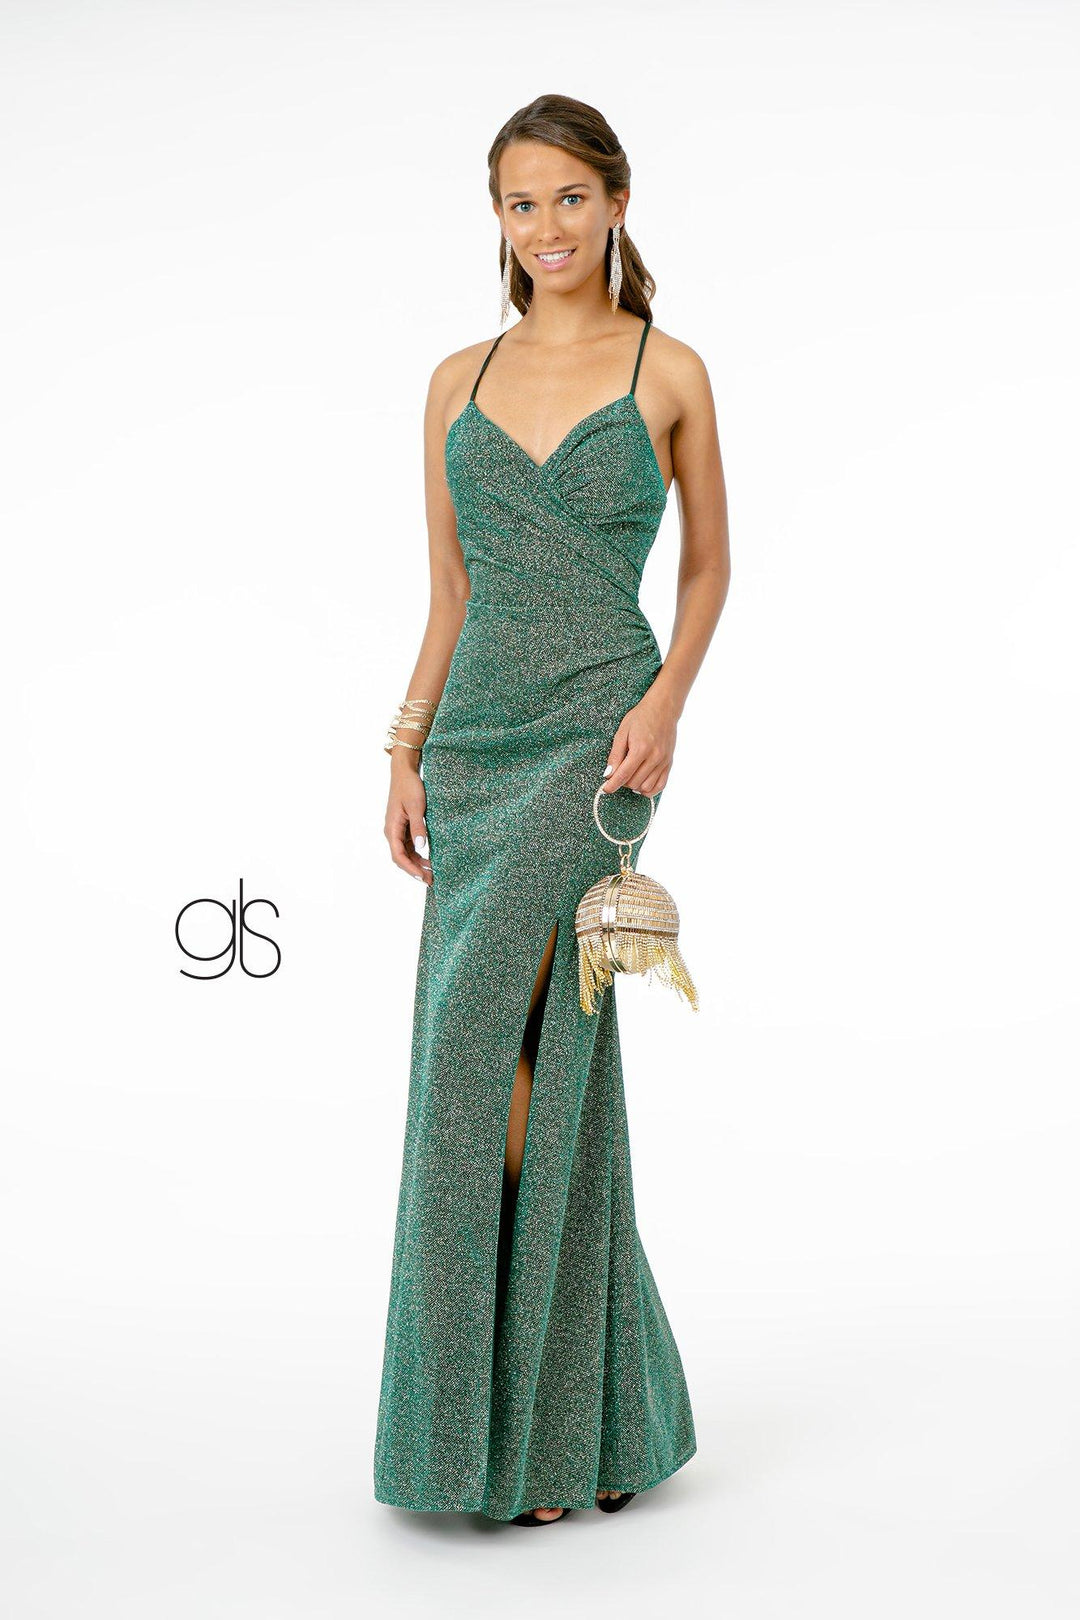 Fitted Long Glitter Crepe Dress with Corset Back by Elizabeth K GL1831